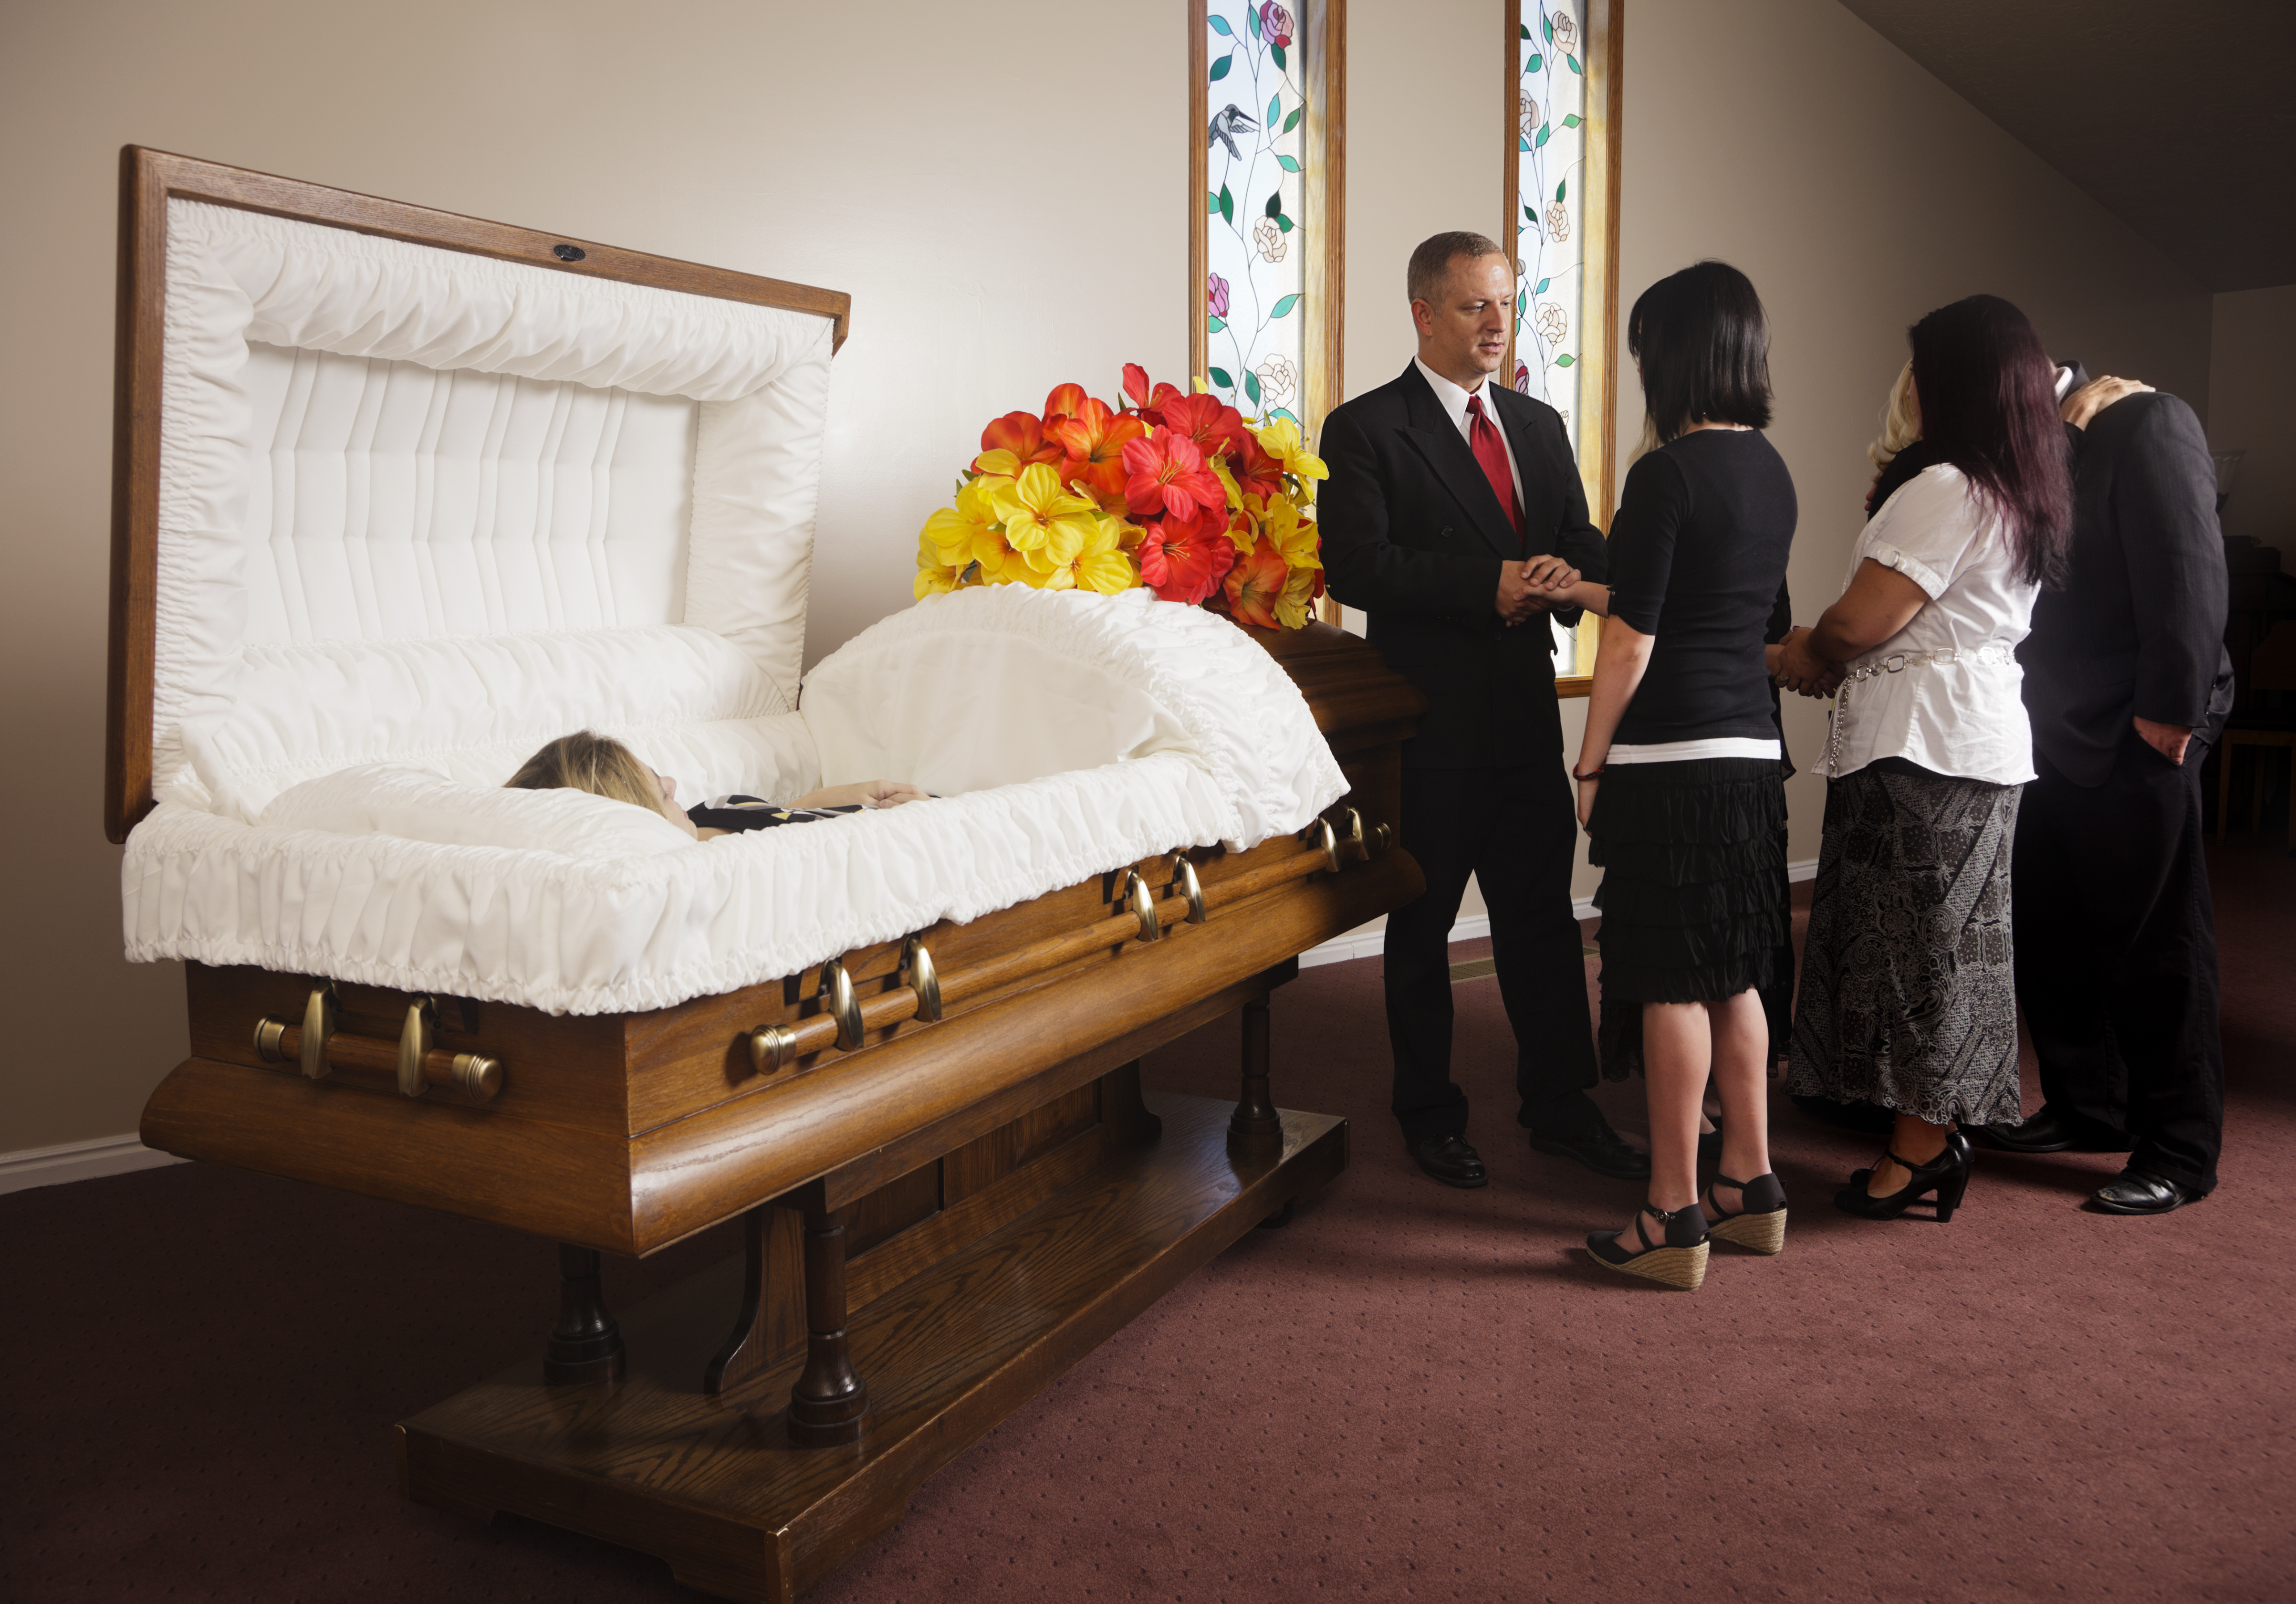 Cesar funeral home